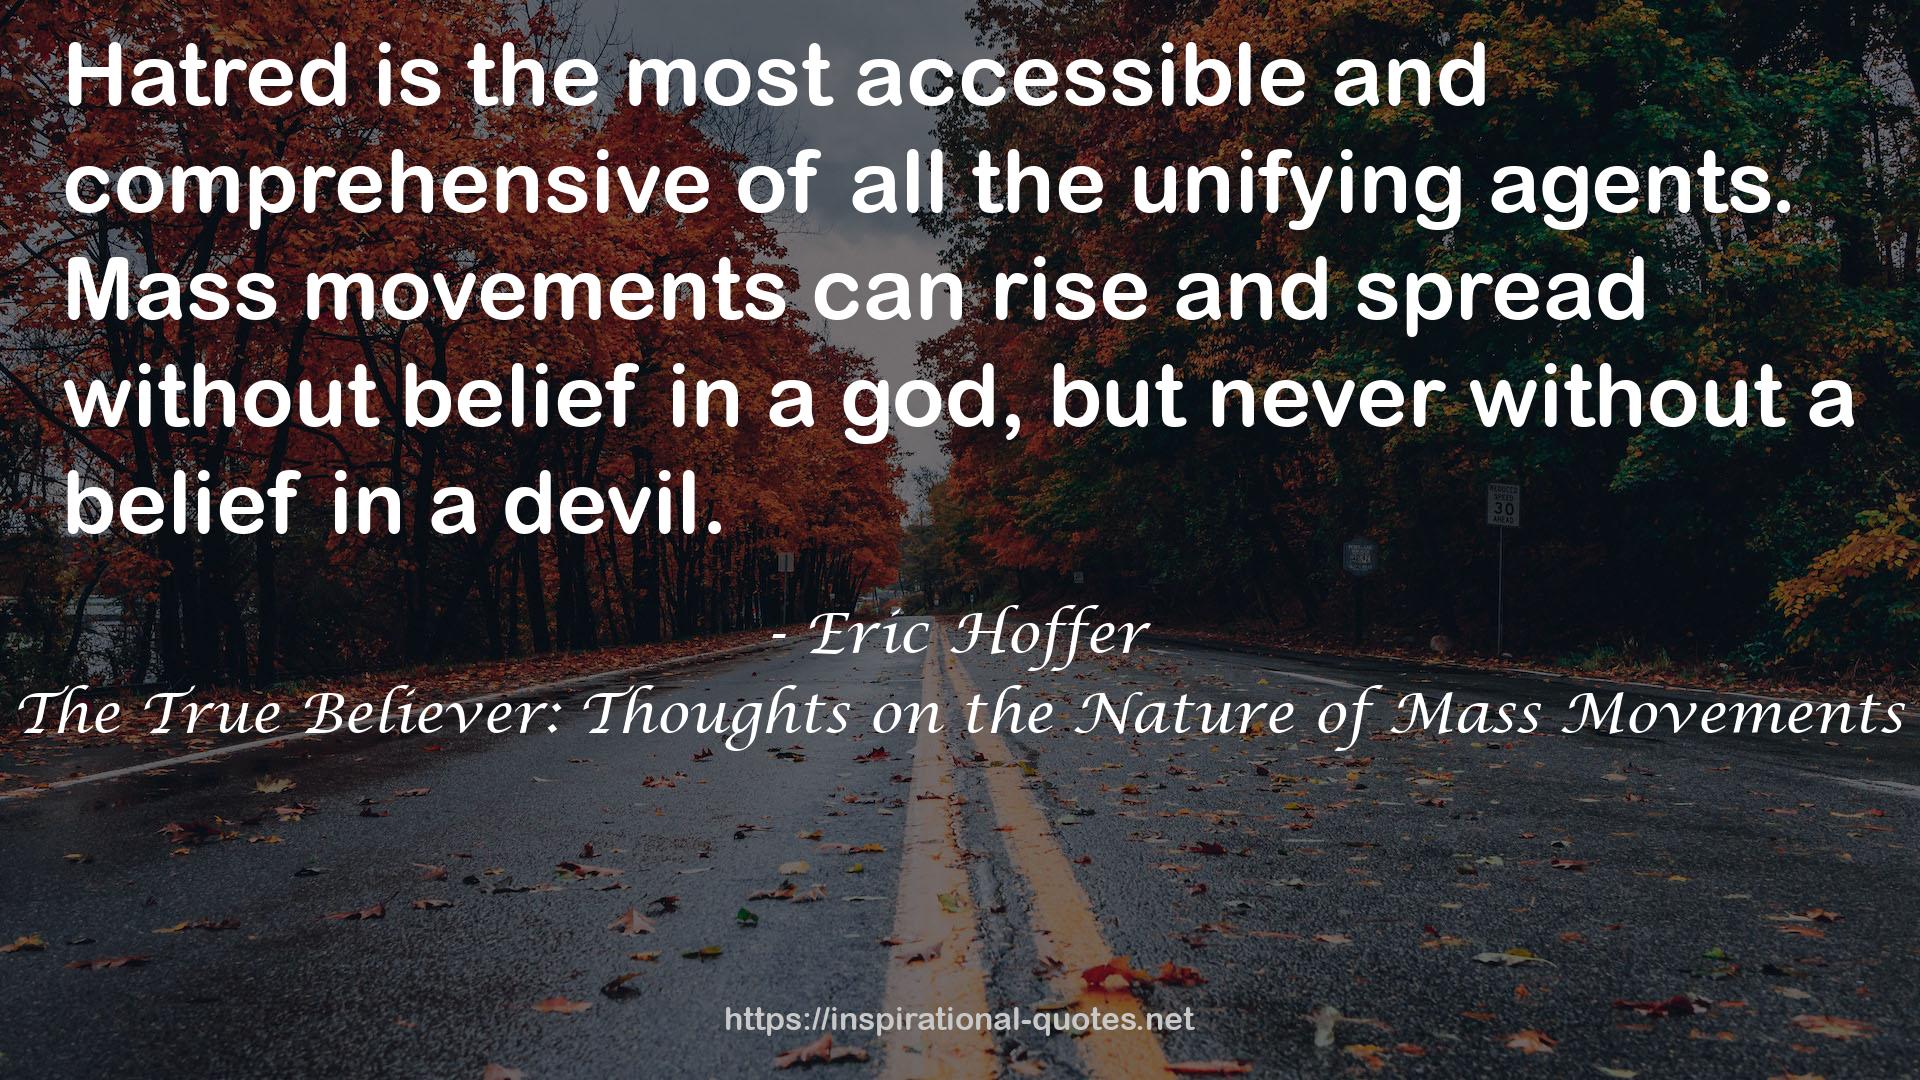 The True Believer: Thoughts on the Nature of Mass Movements QUOTES